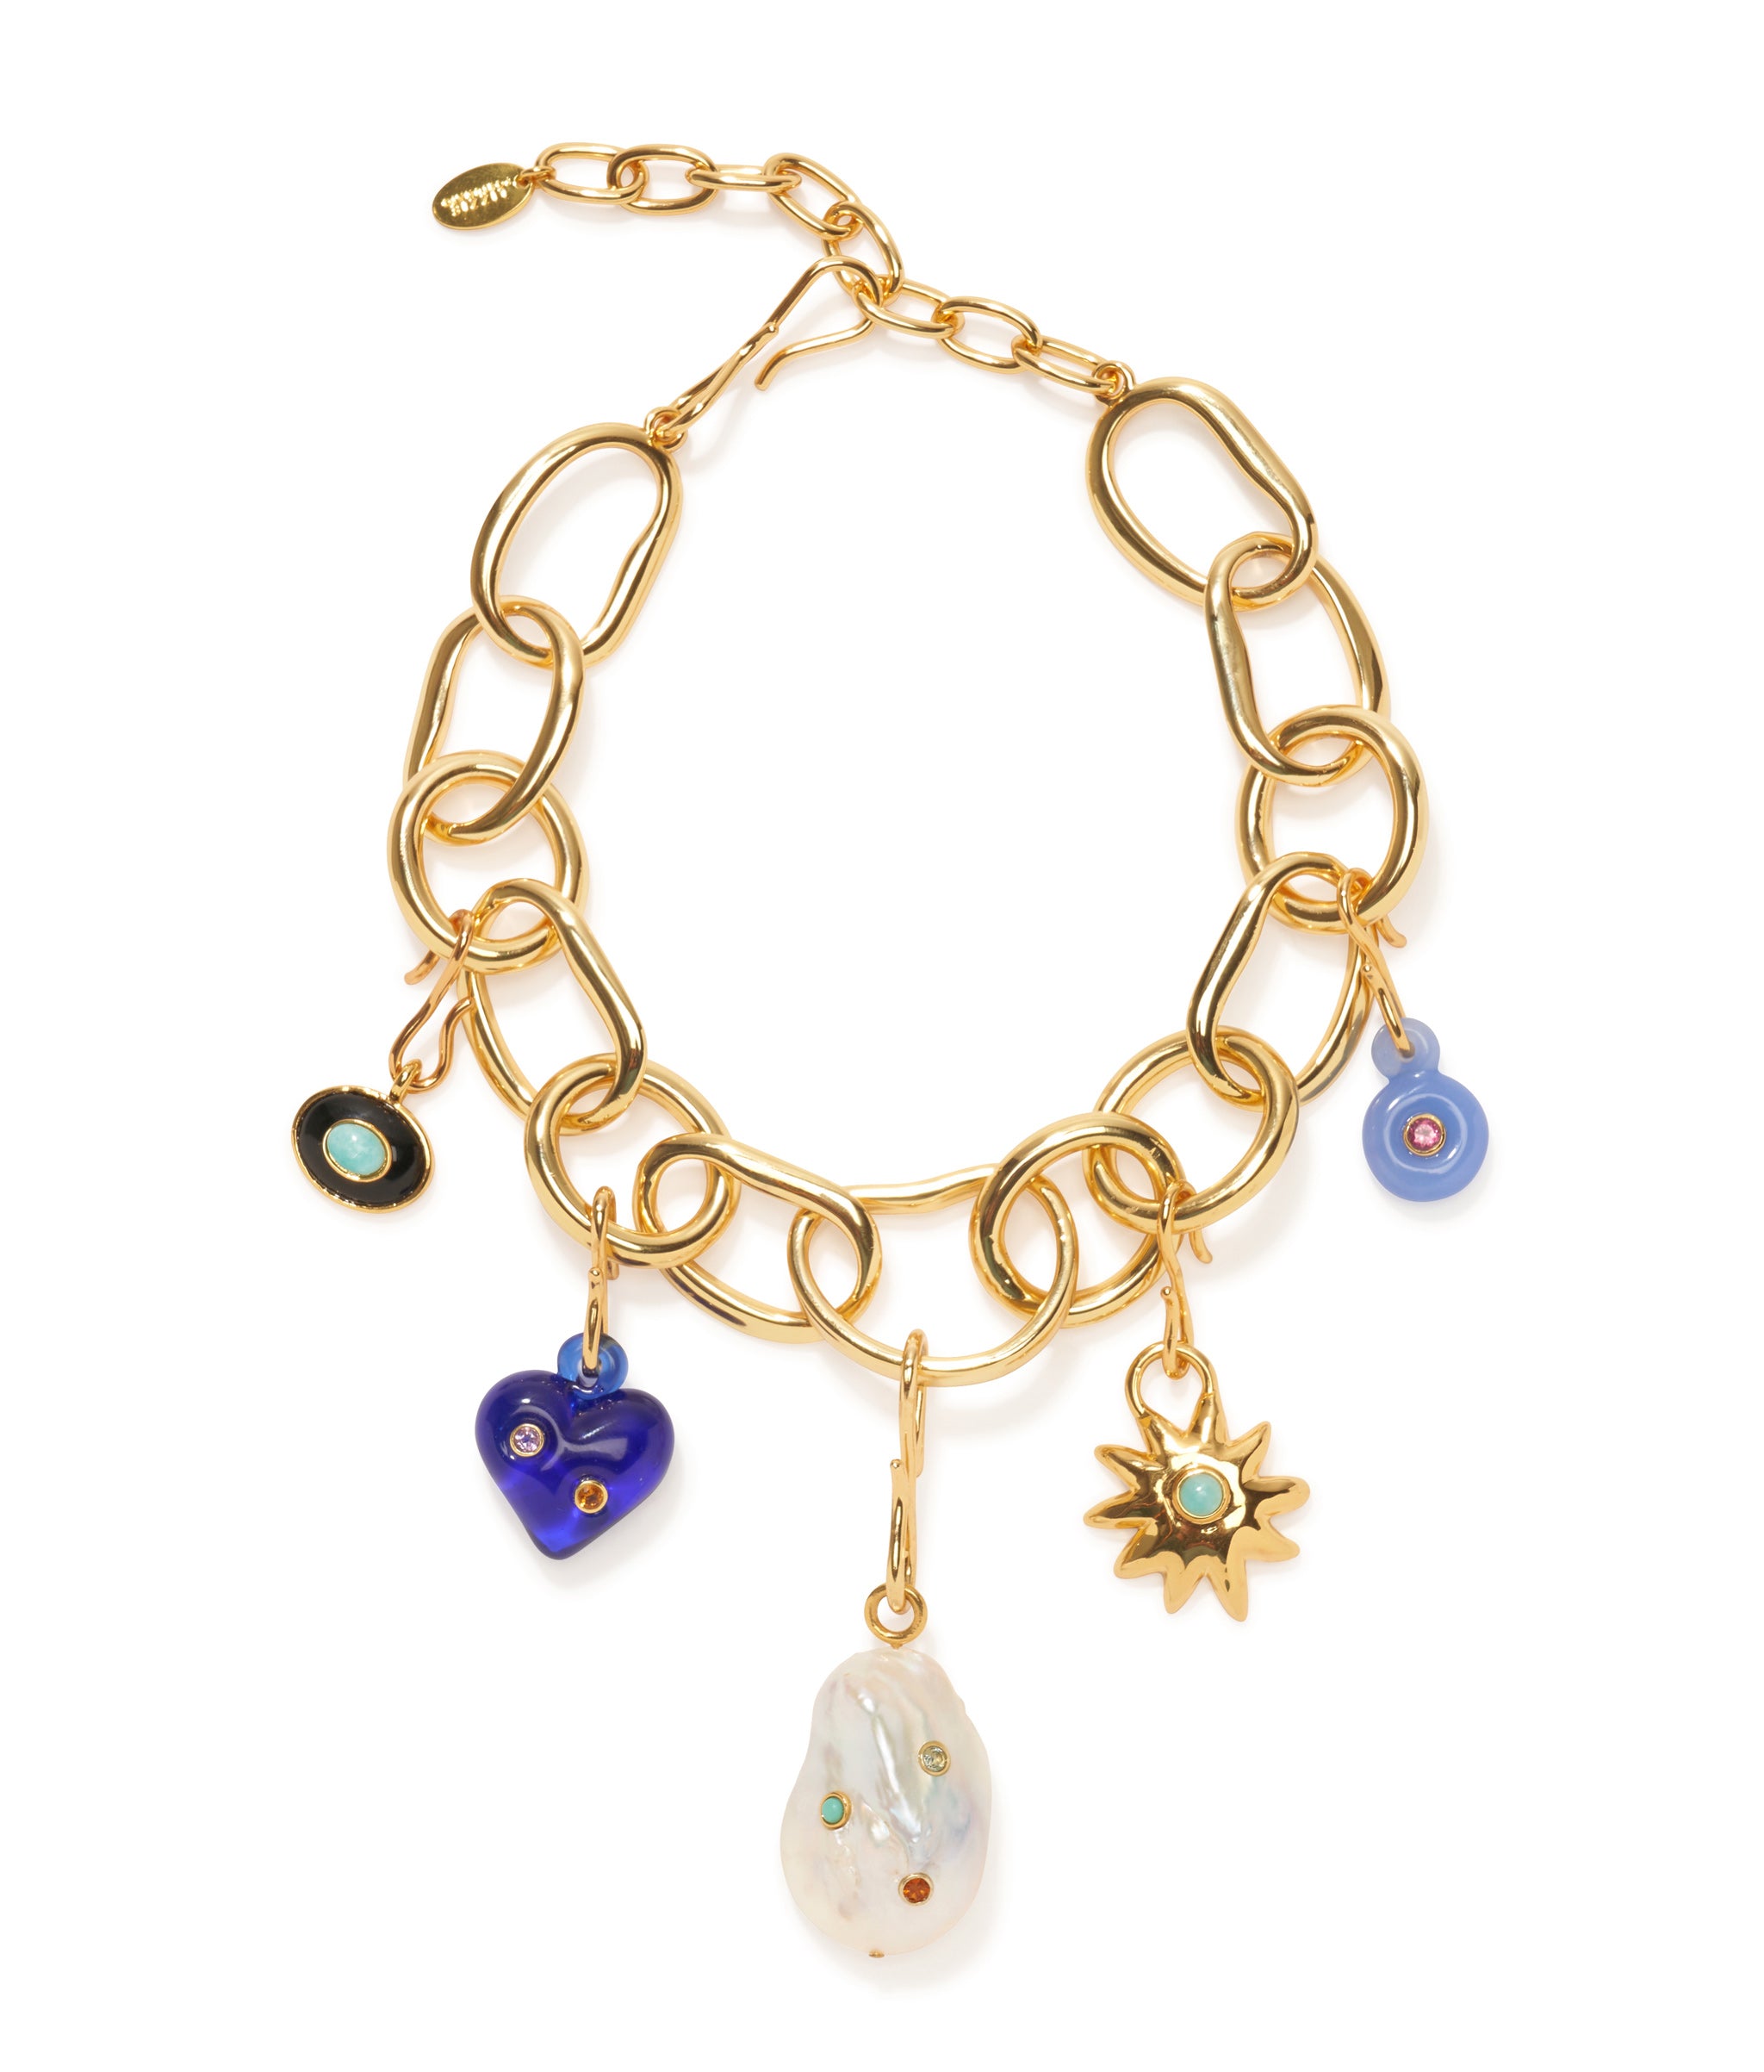 Gold Porto Chain on white with five mood charms attached, including Hope Charm.